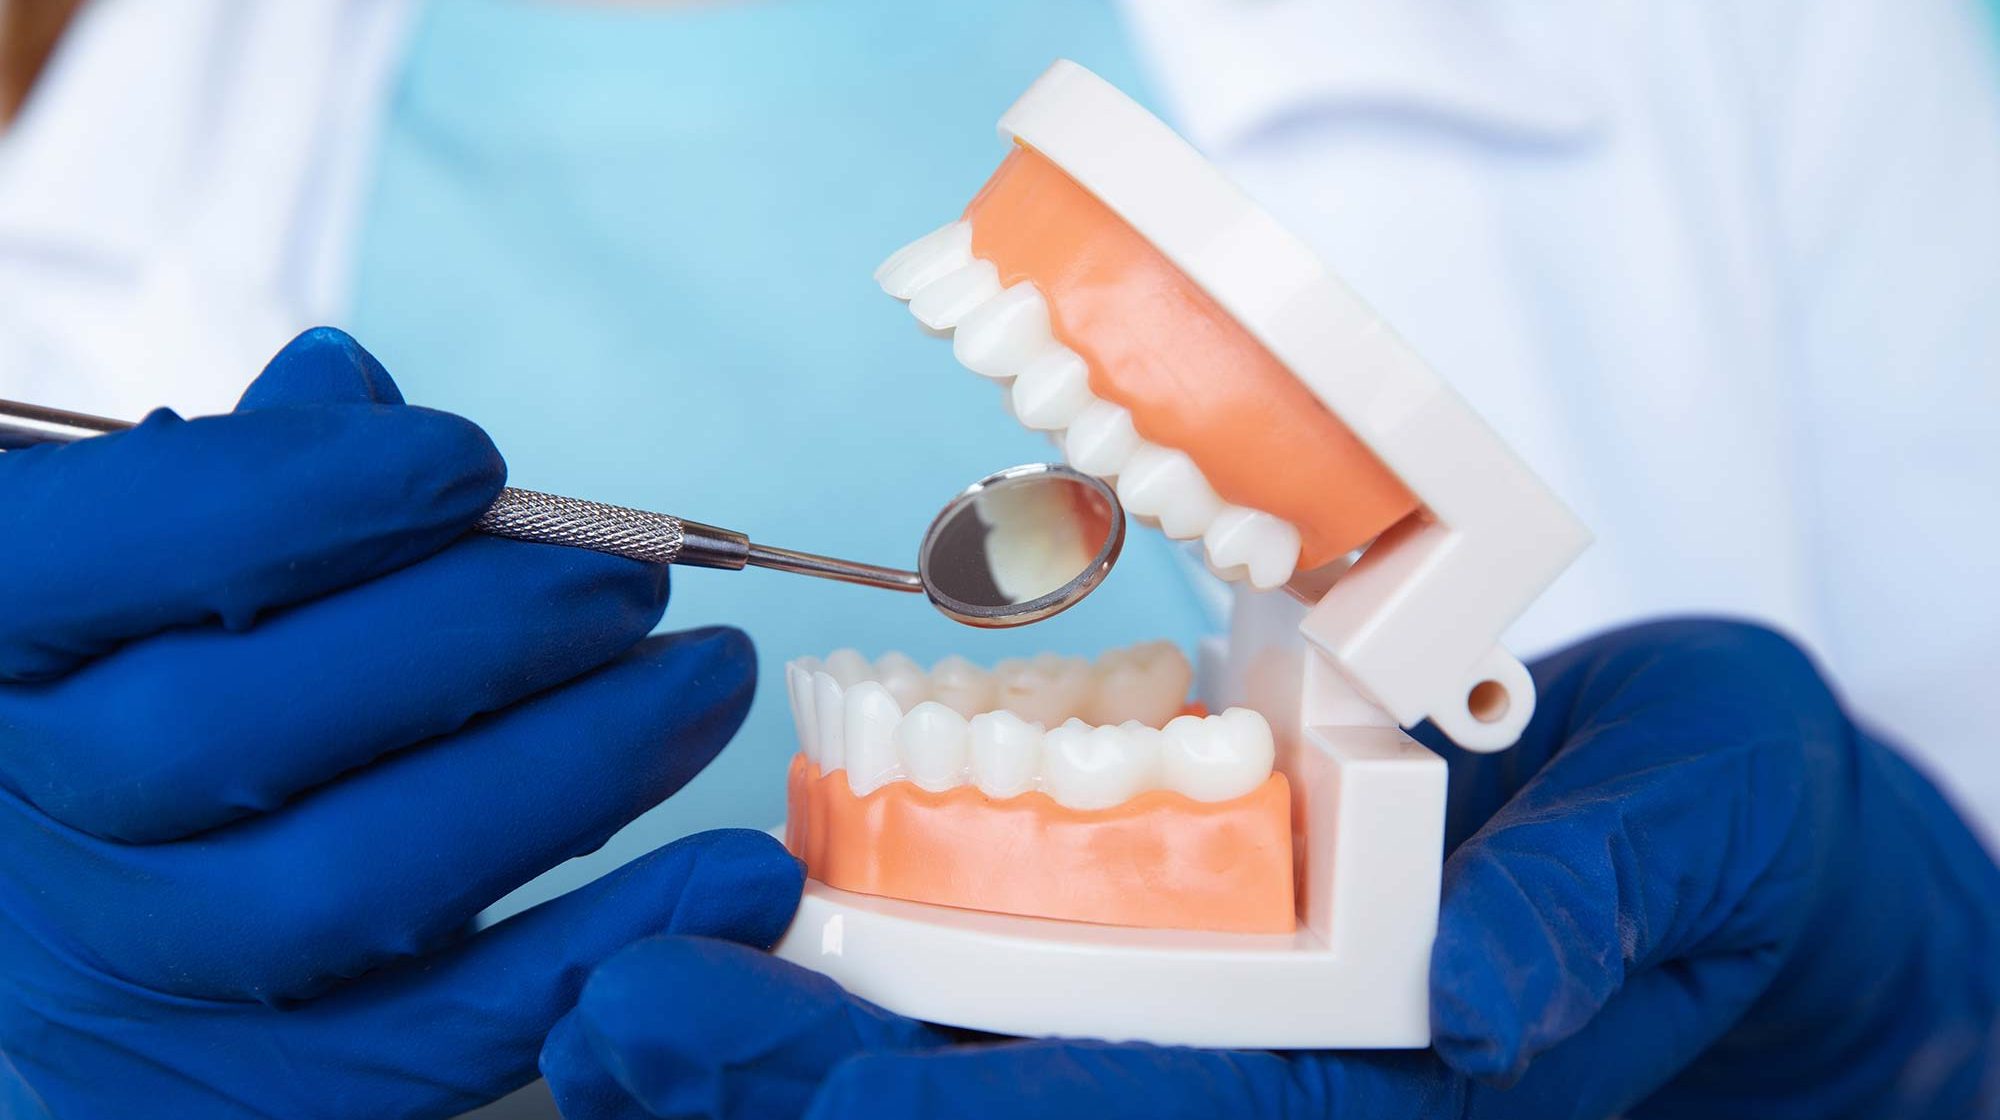 The UK ranks sixth for the best dental health in Europe – despite having one of the lowest numbers of dentists per capita